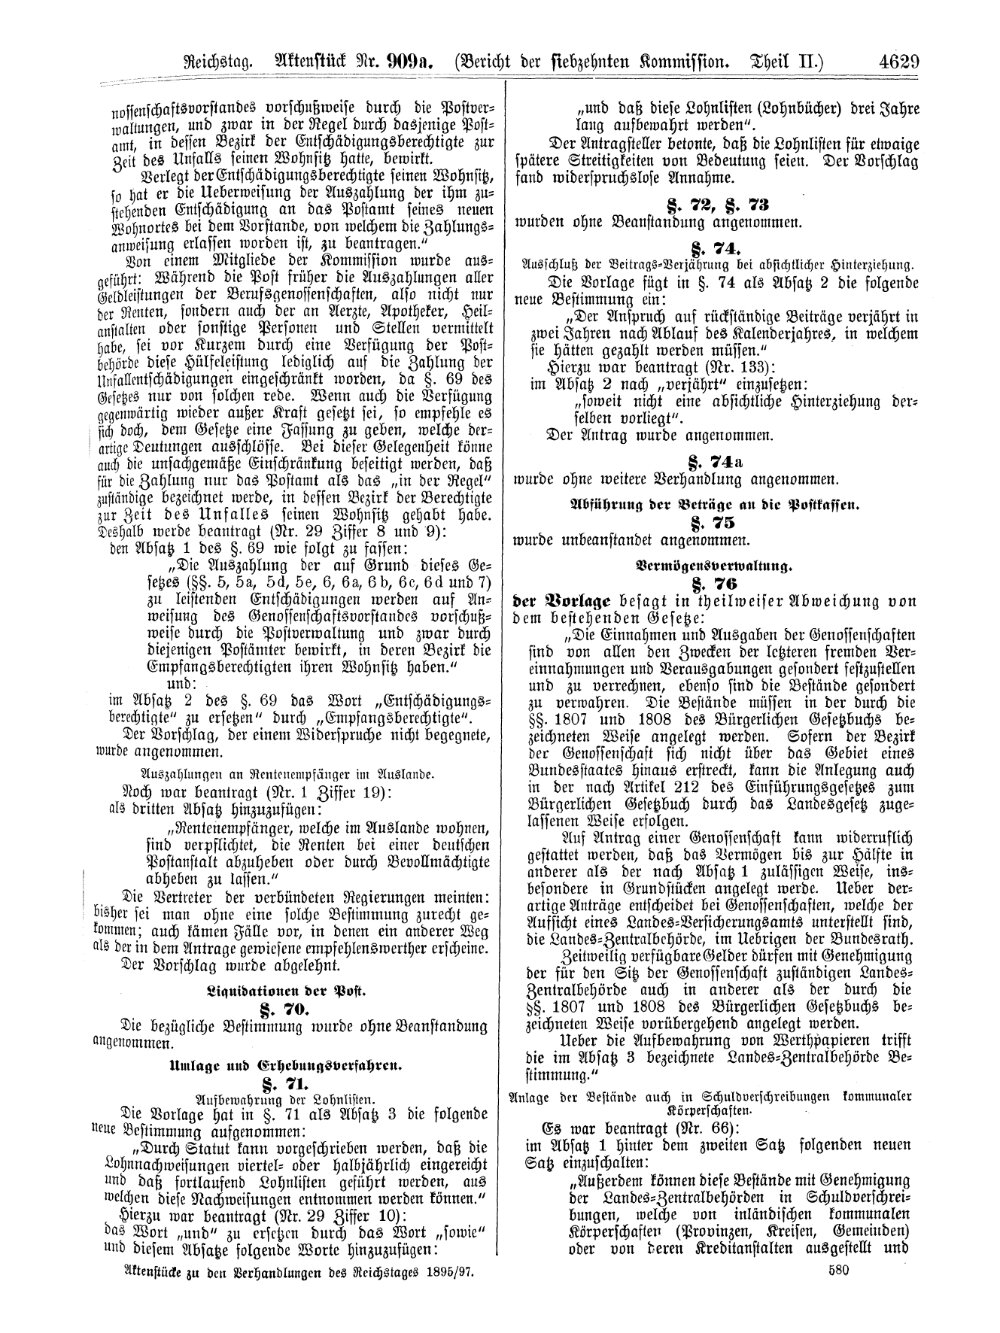 Scan of page 4629